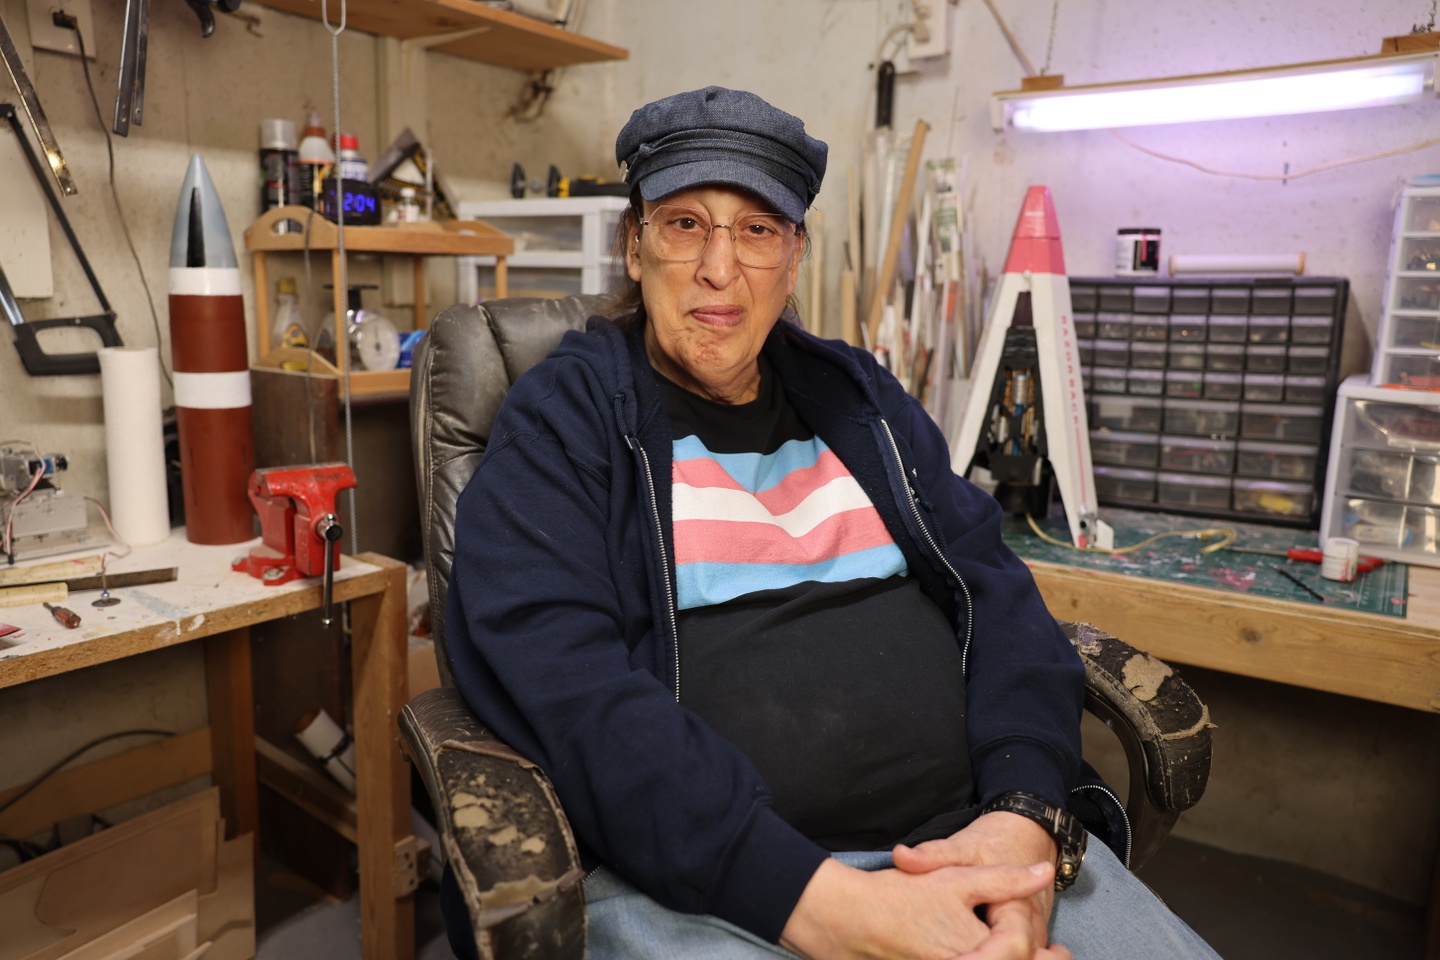 Monica Helms sitting in a chair wearing a shirt that has the trans flag on it